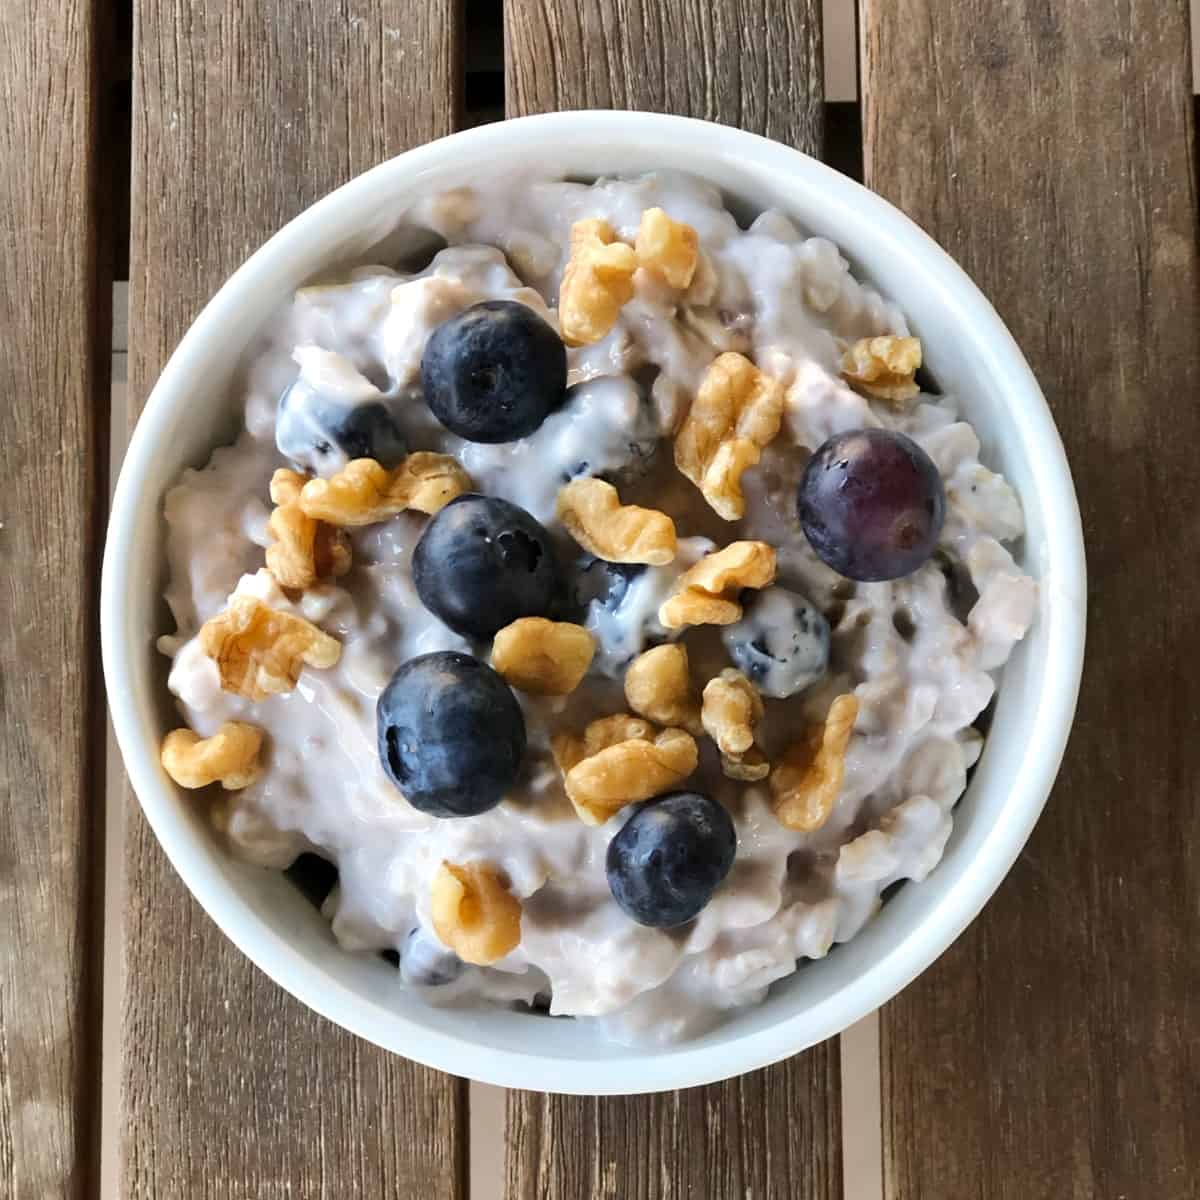 Blueberry maple overnight oats topped with toasted walnuts and fresh blueberries from above.